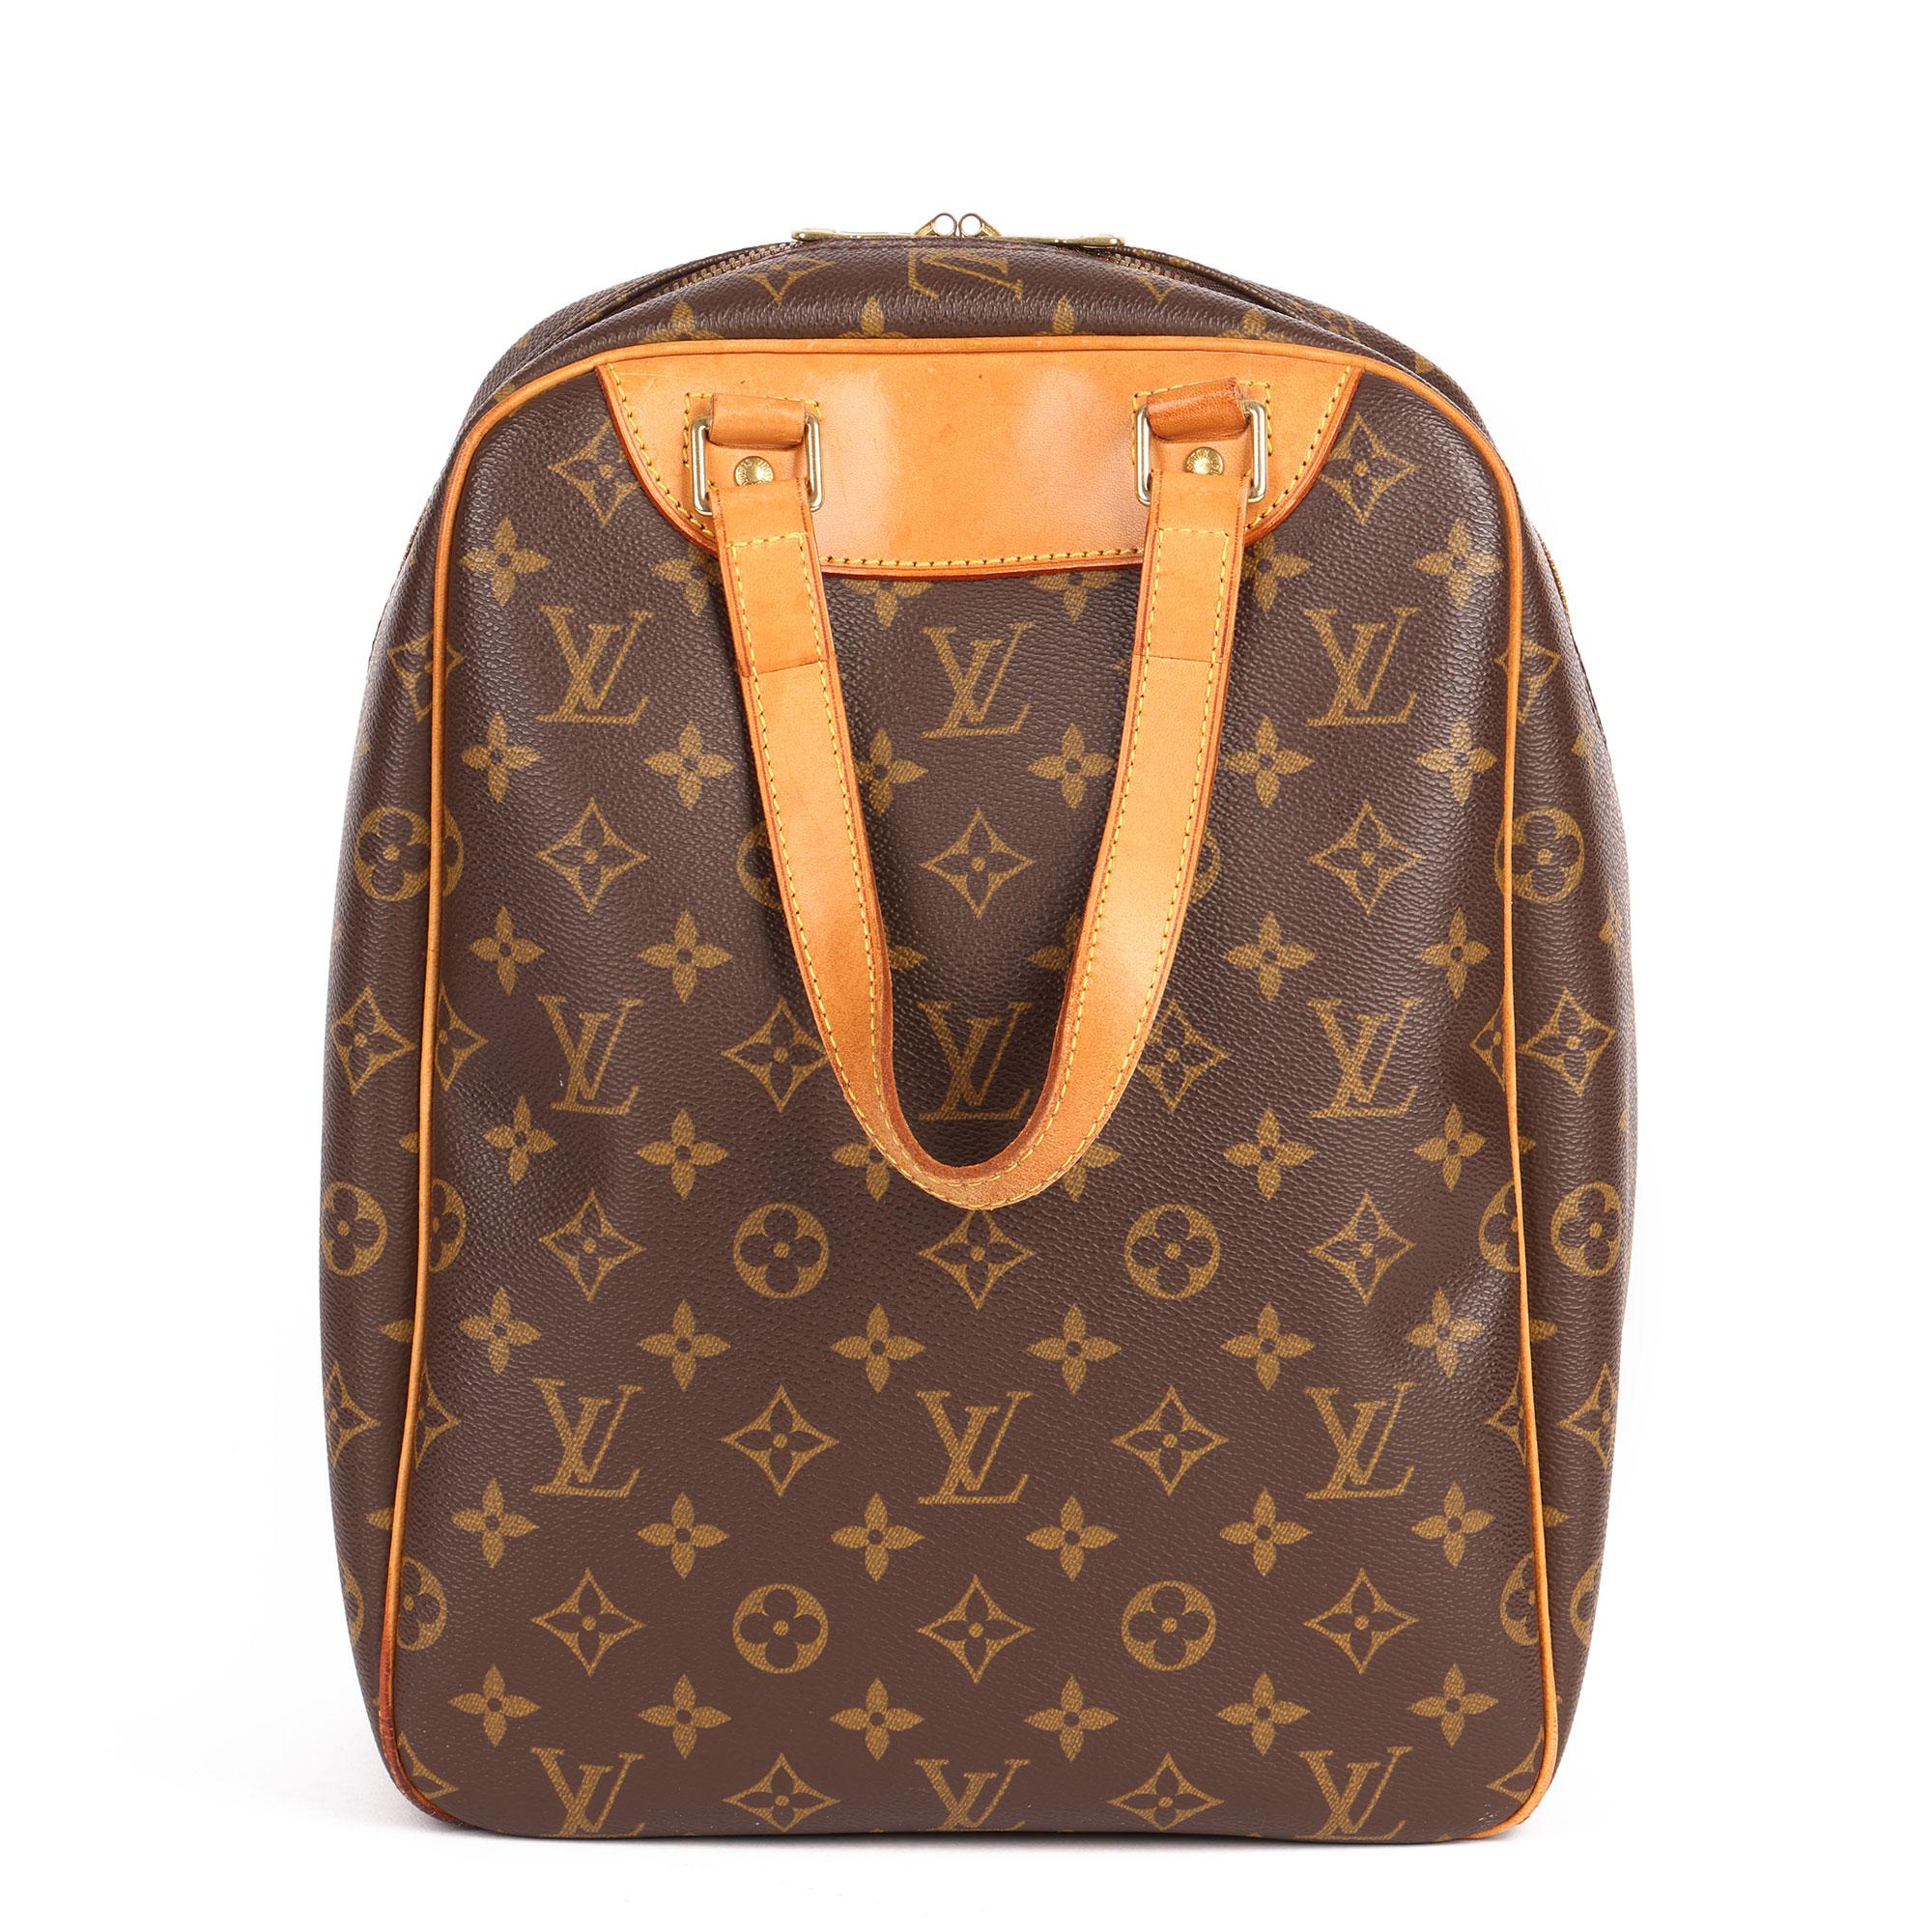 LOUIS VUITTON
Brown Monogram Coated Canvas & Vachetta Leather Vintage Excursion

Xupes Reference: CB441
Serial Number: VI1919
Age (Circa): 1999
Authenticity Details: Date Stamp (Made in France)
Gender: Ladies
Type: Tote

Colour: Brown
Hardware: